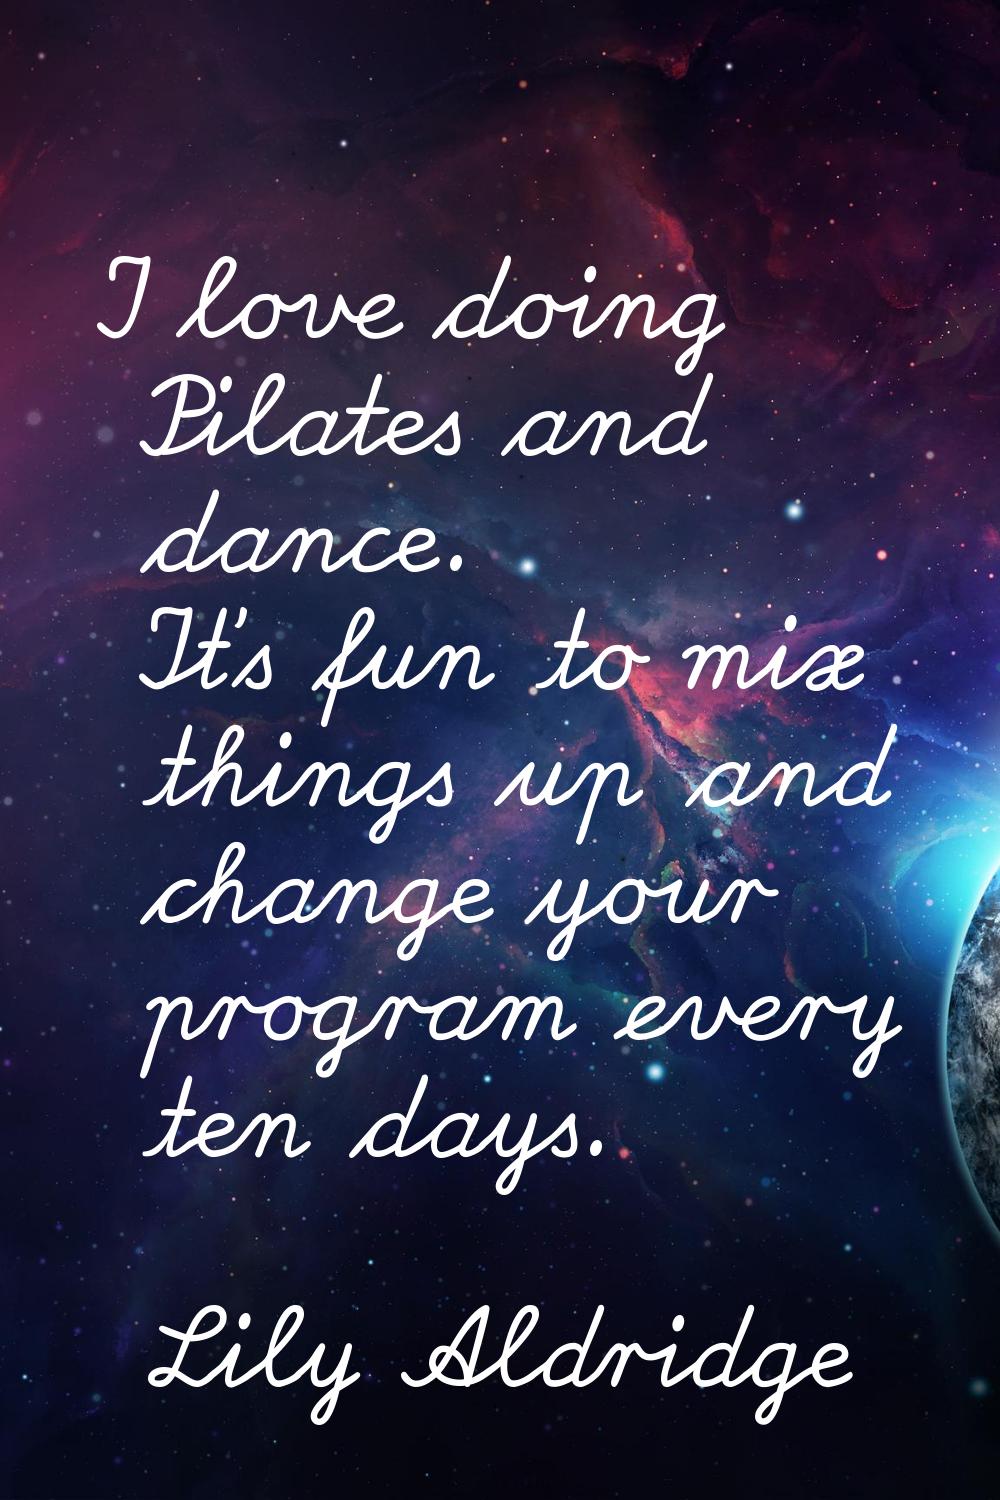 I love doing Pilates and dance. It's fun to mix things up and change your program every ten days.